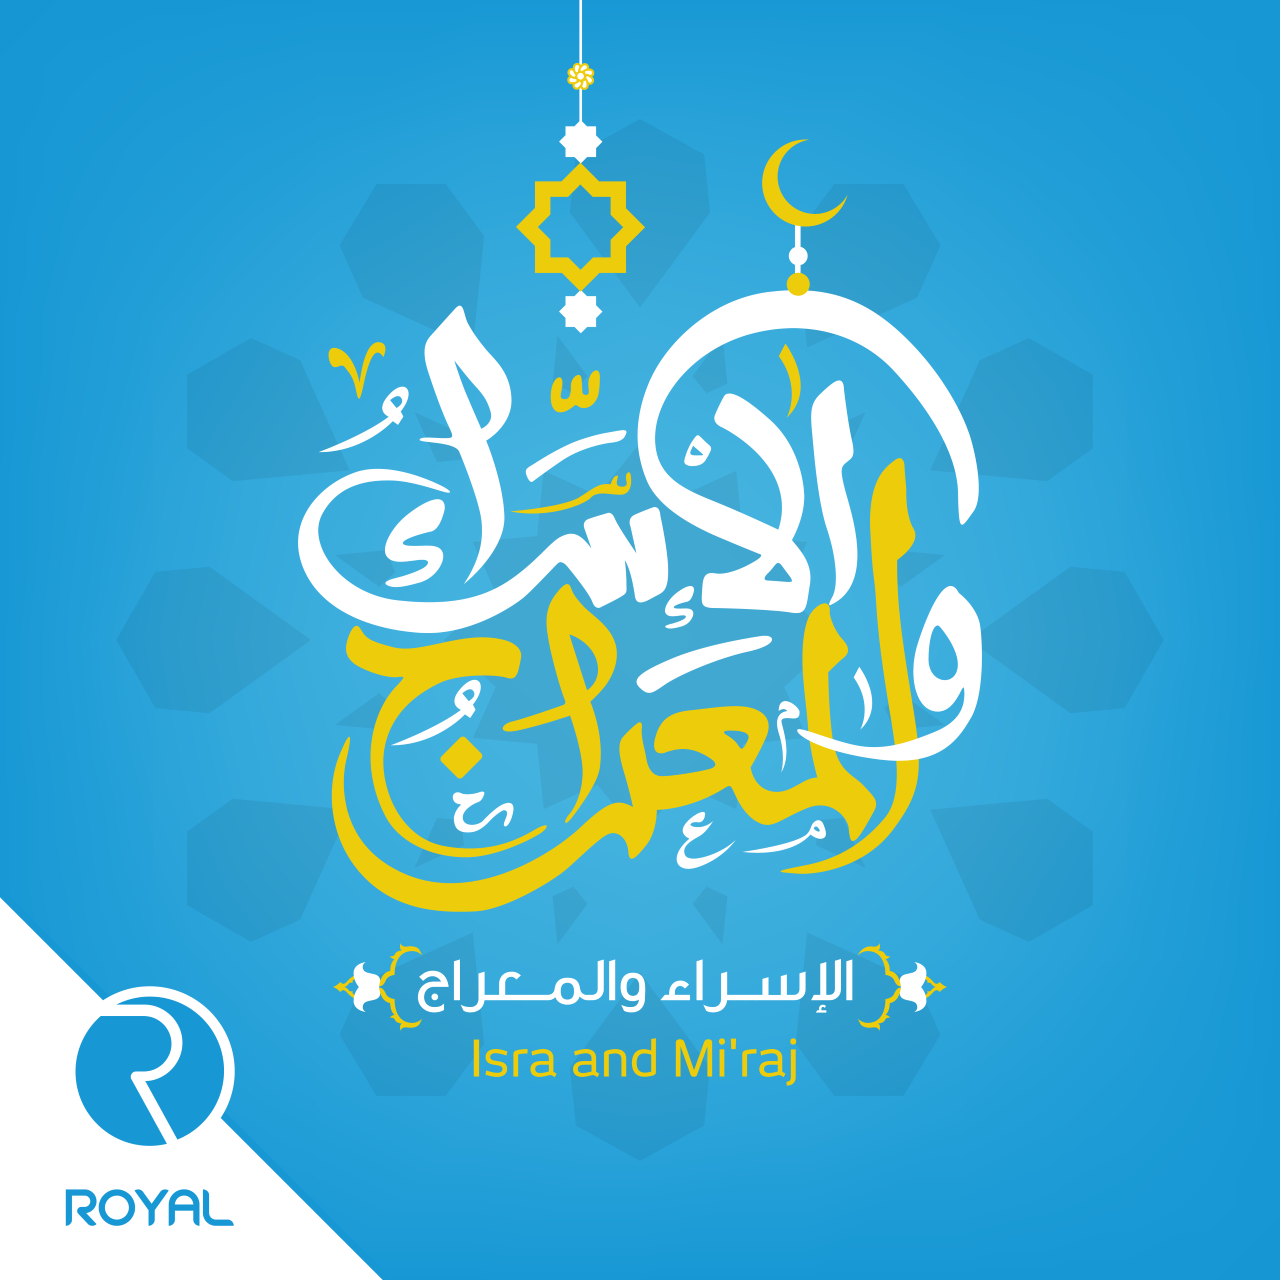 The anniversary of the Isra and Mi'raj is a journey that motivates us to progress, work and diligence